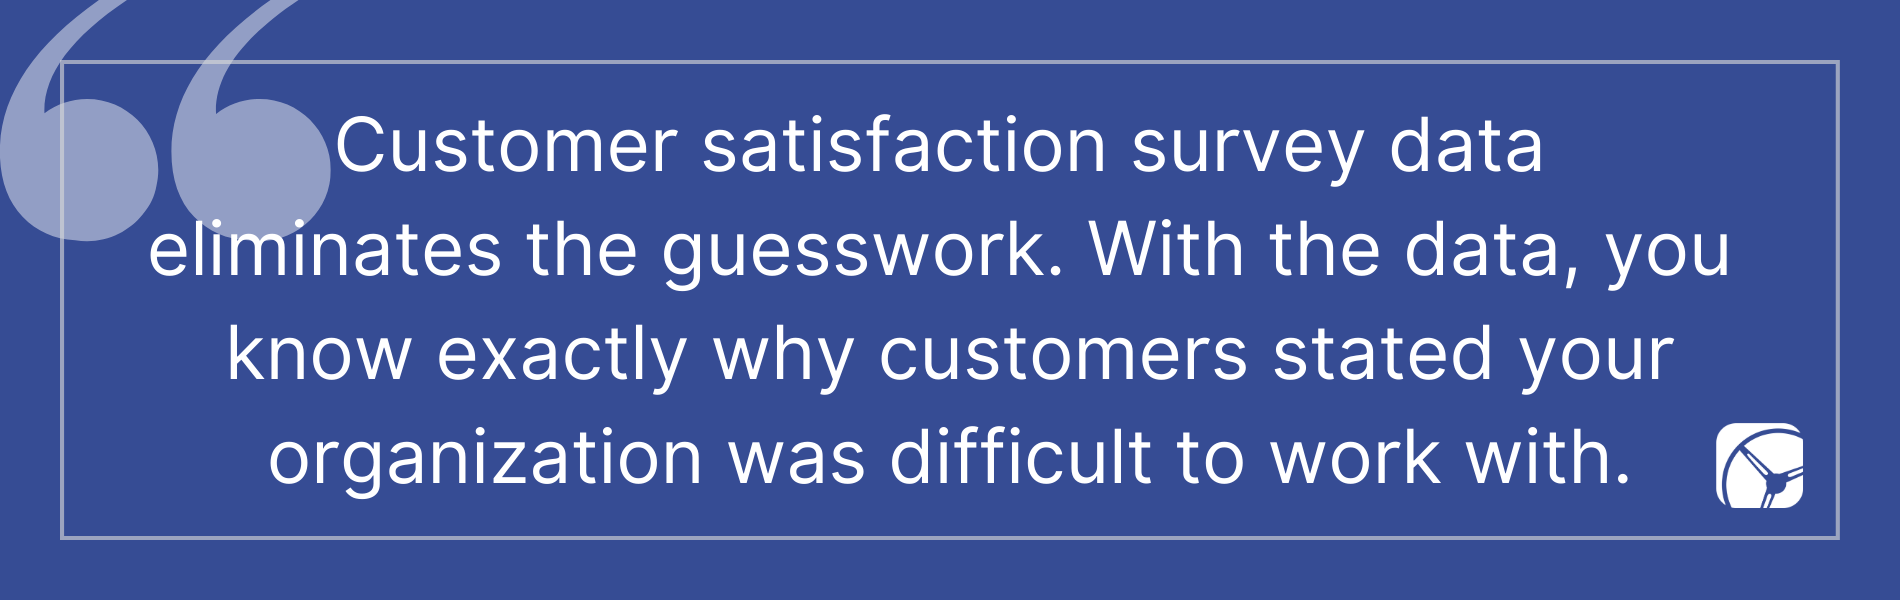 Customer satisfaction survey data  eliminates the guesswork. With the data, you  know exactly why customers stated your organization was difficult to work with.